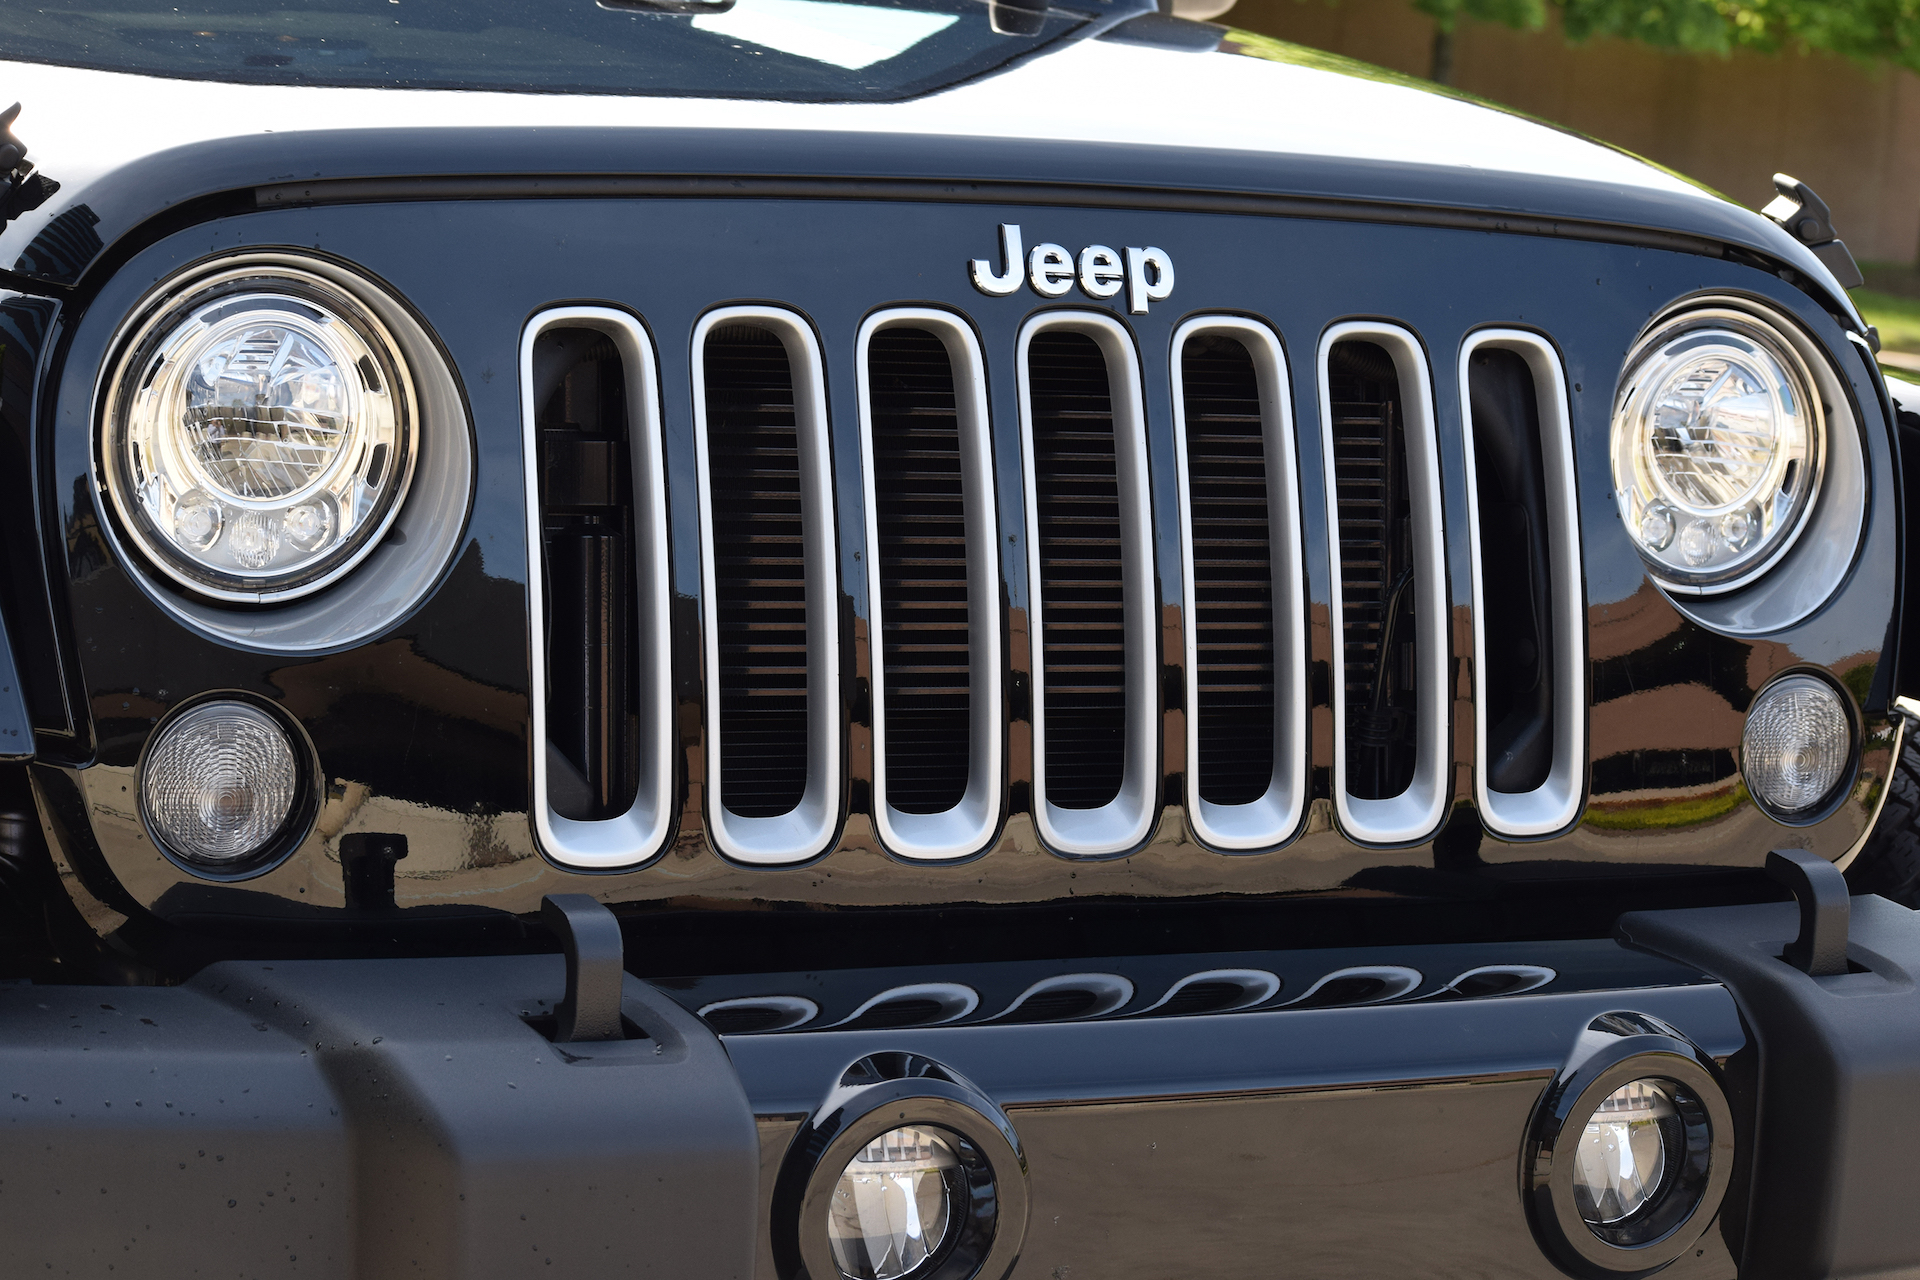 The 2017 Jeep Wrangler just received modern headlights